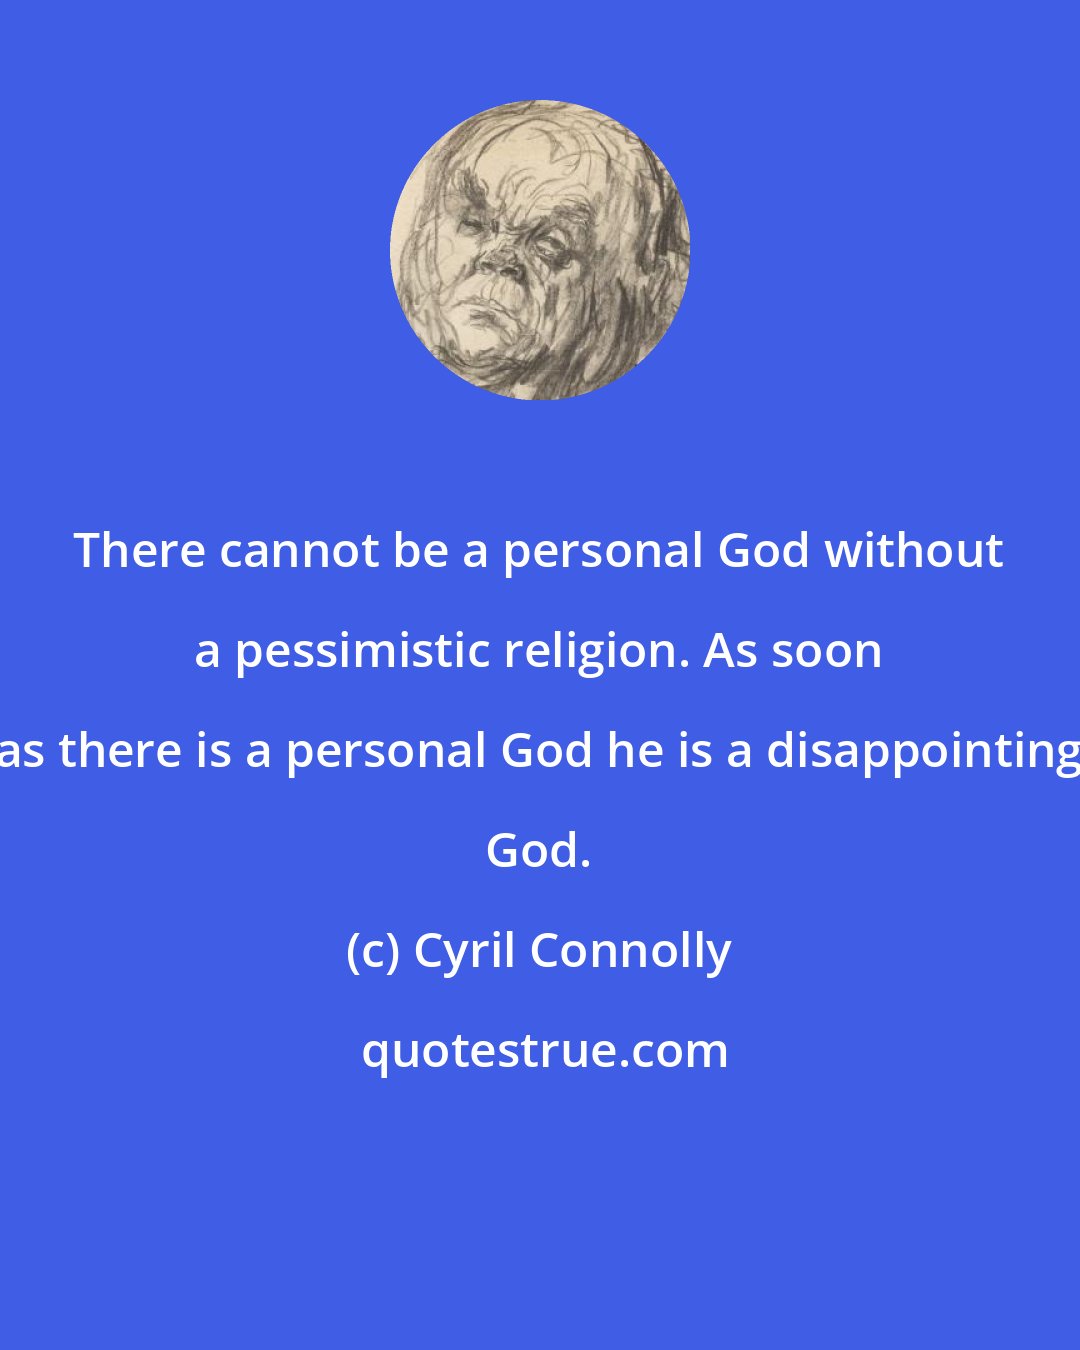 Cyril Connolly: There cannot be a personal God without a pessimistic religion. As soon as there is a personal God he is a disappointing God.